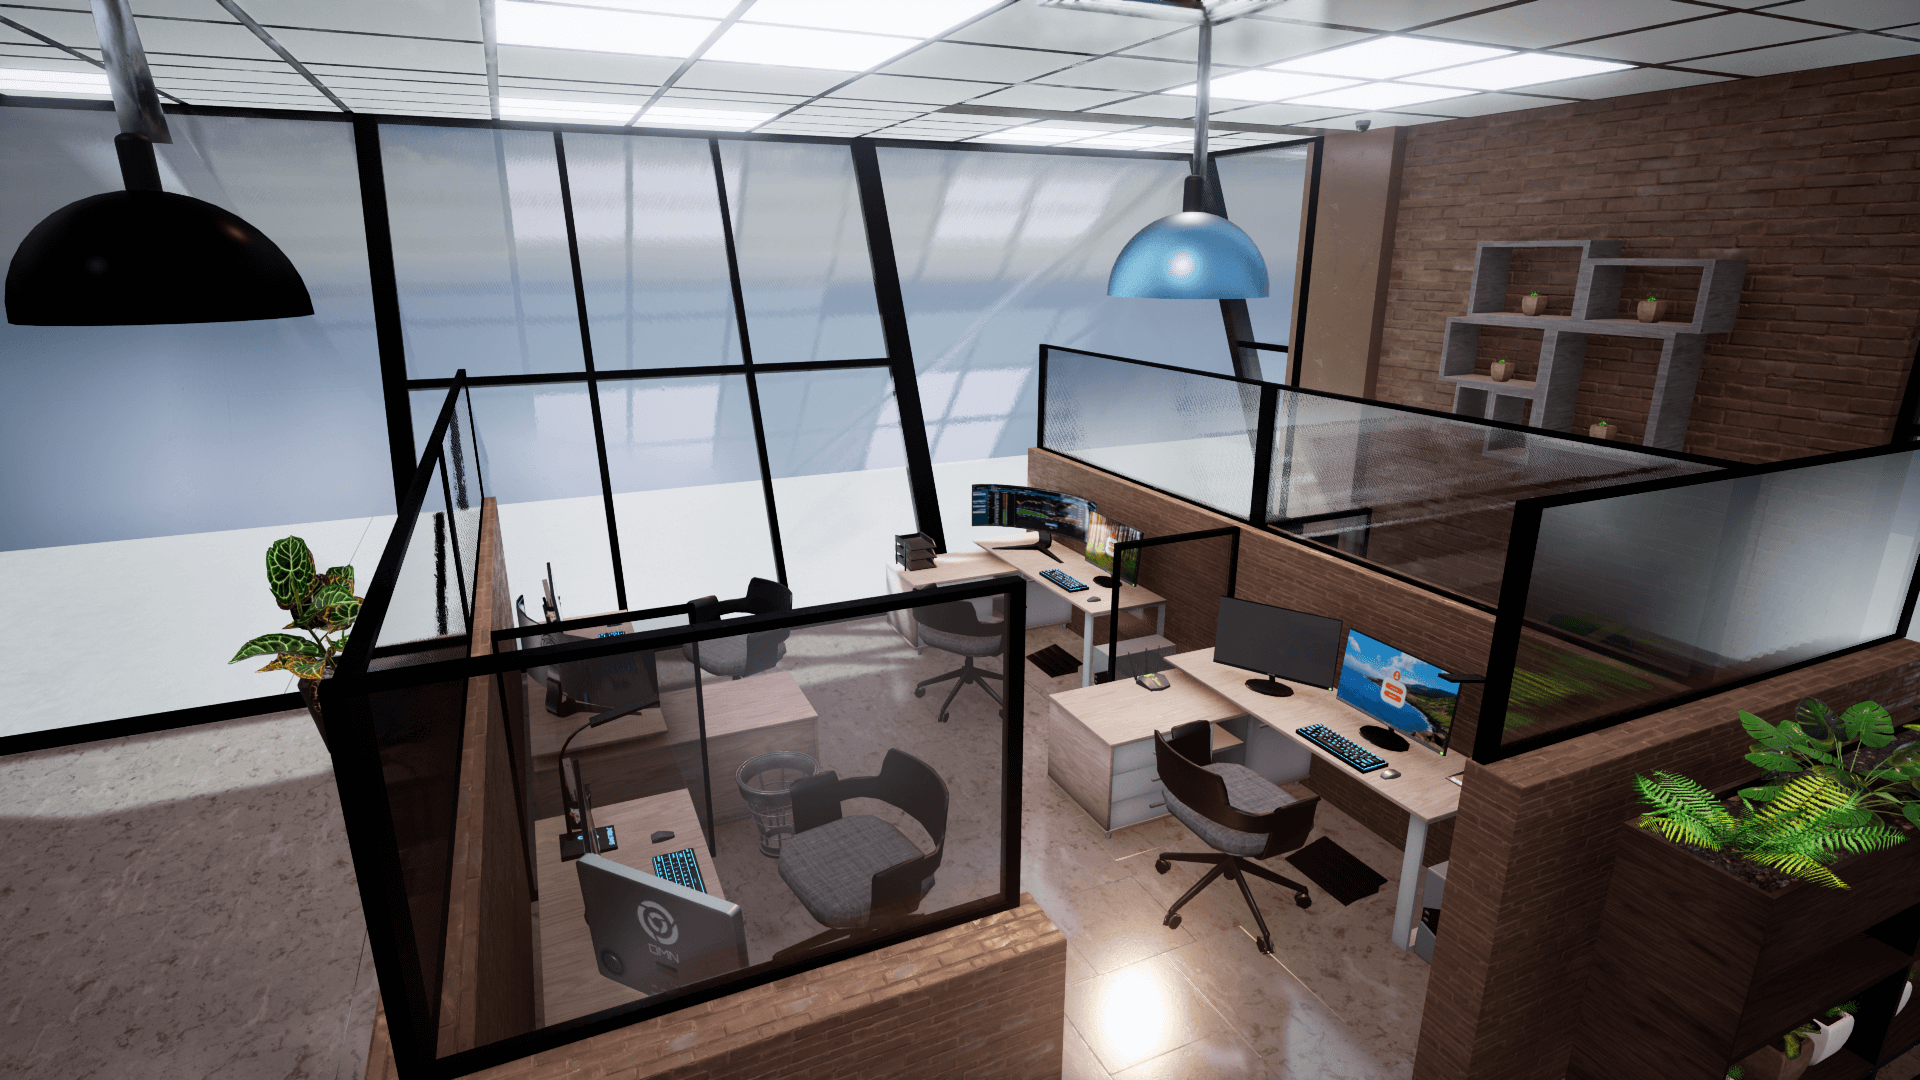 An image showing Modern Offices asset pack, created with Unreal Engine